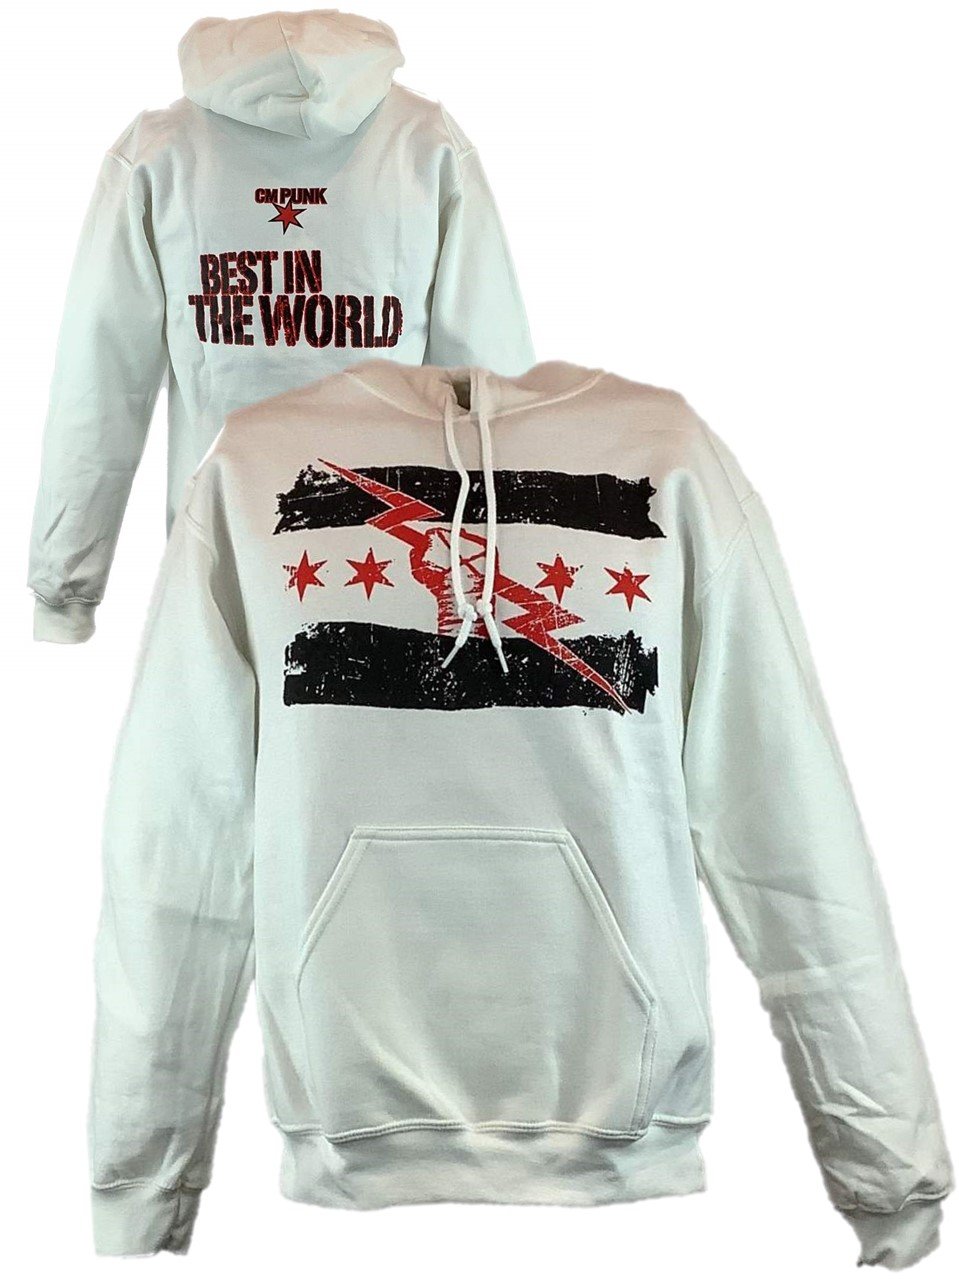 CM Punk Best In The World White Pullover Hoody Sweatshirt New – Extreme  Wrestling Shirts